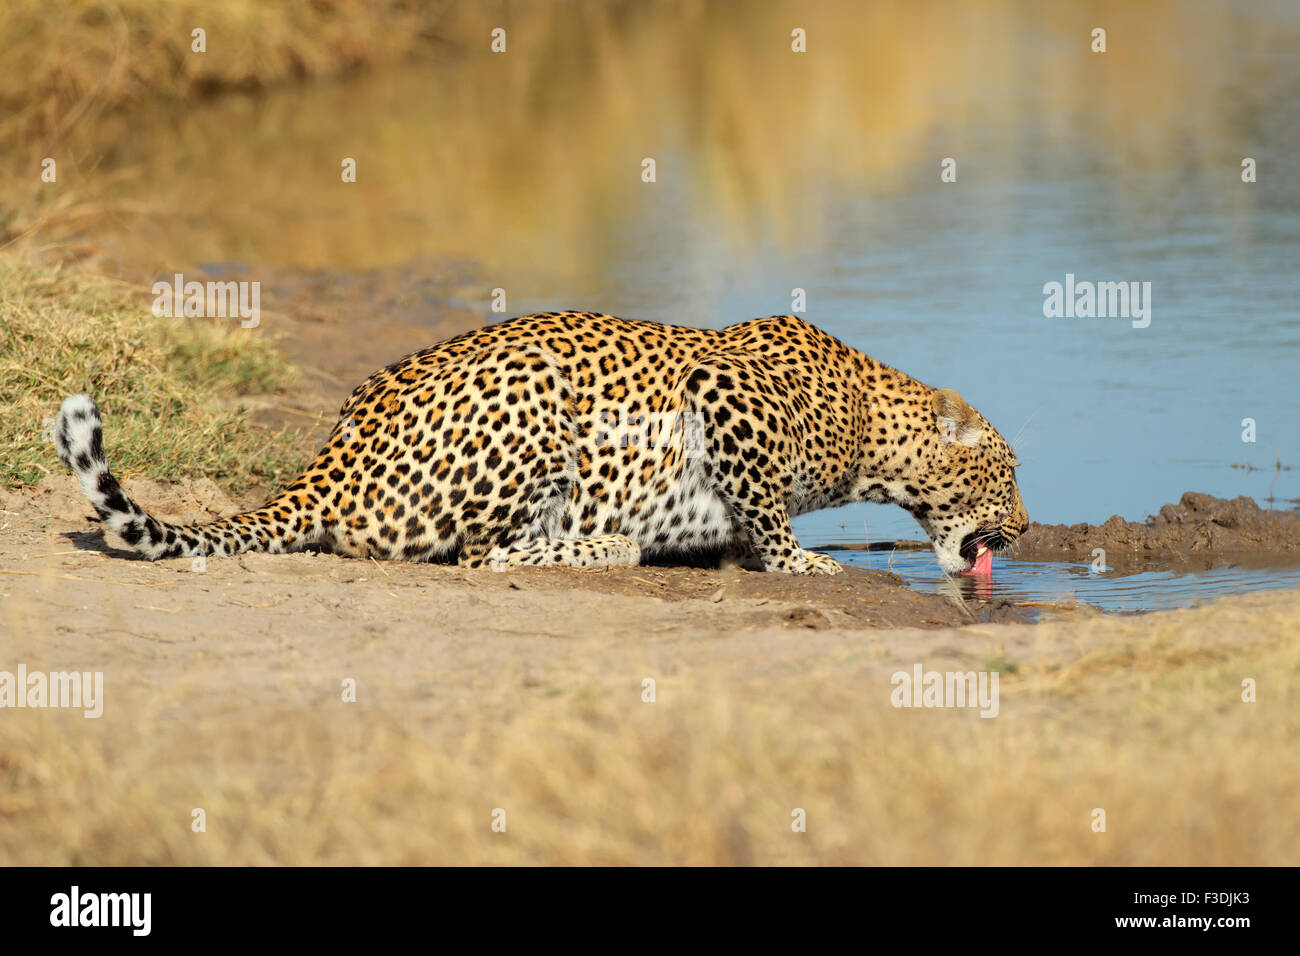 Leopard (Panthera pardus) drinking at waterhole, Sabie-Sand nature reserve, South Africa Stock Photo